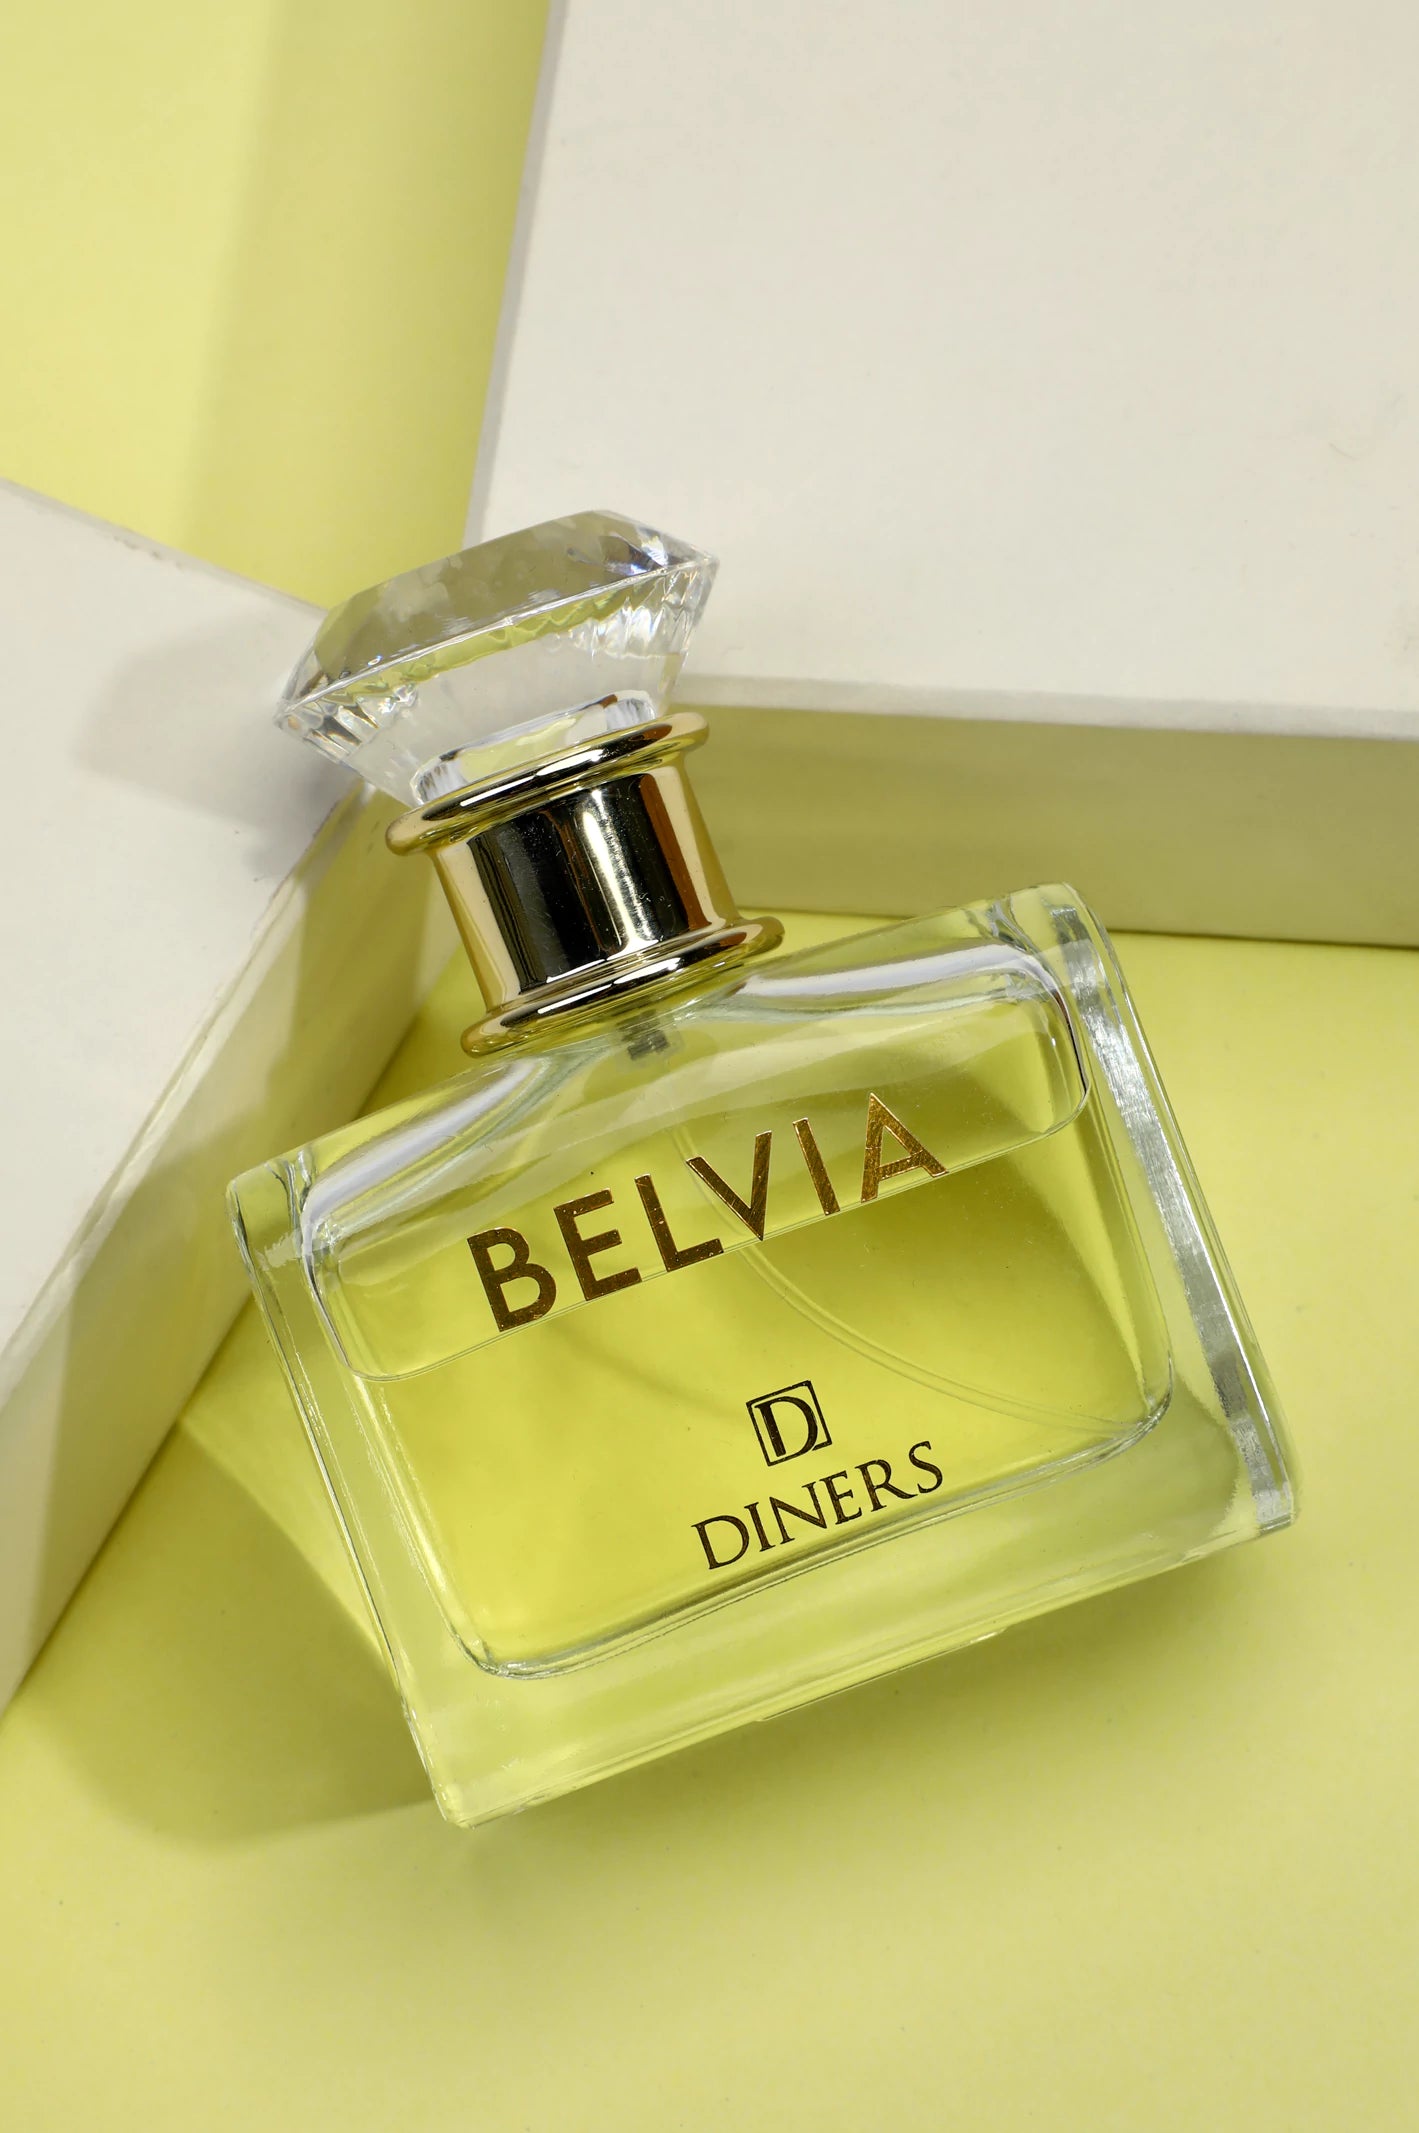 BELVIA for Women From Diners